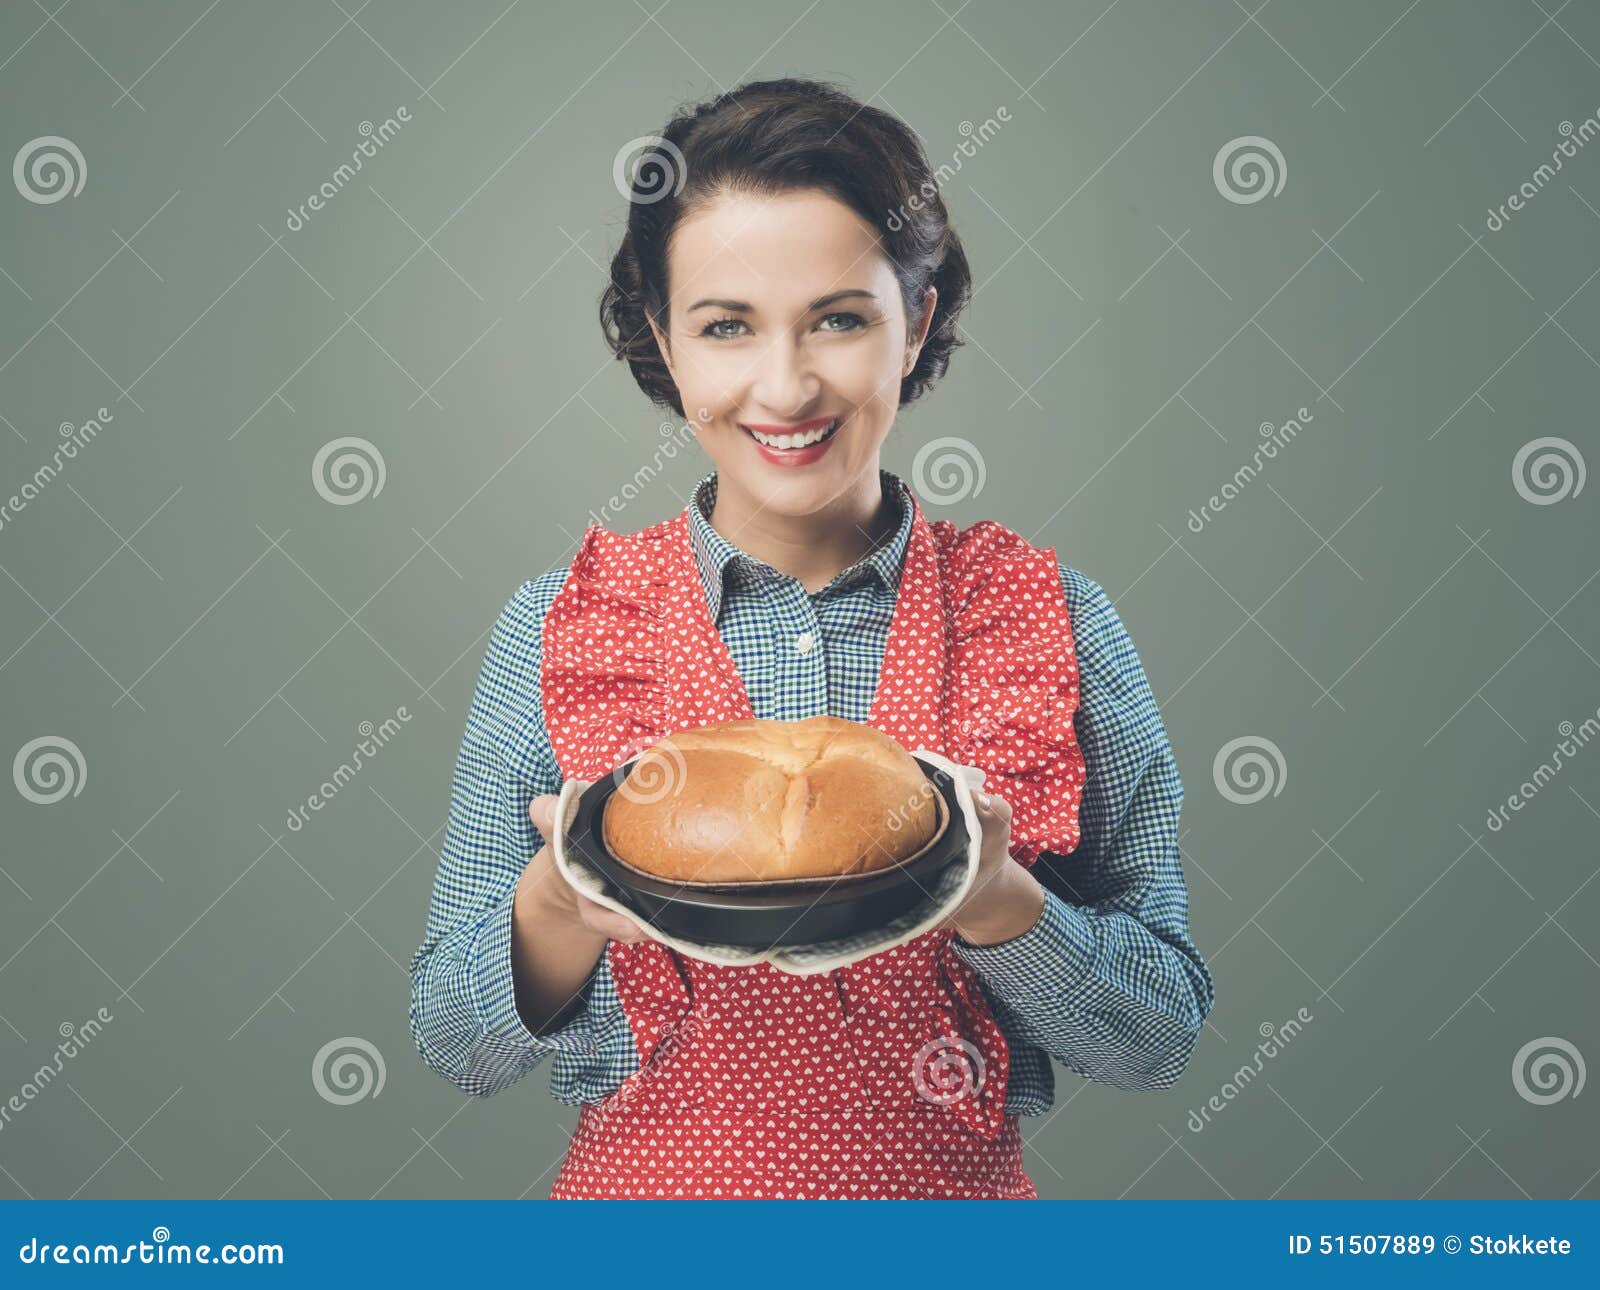 Vintage Housewife Holding an Homemade Cake Stock Image picture